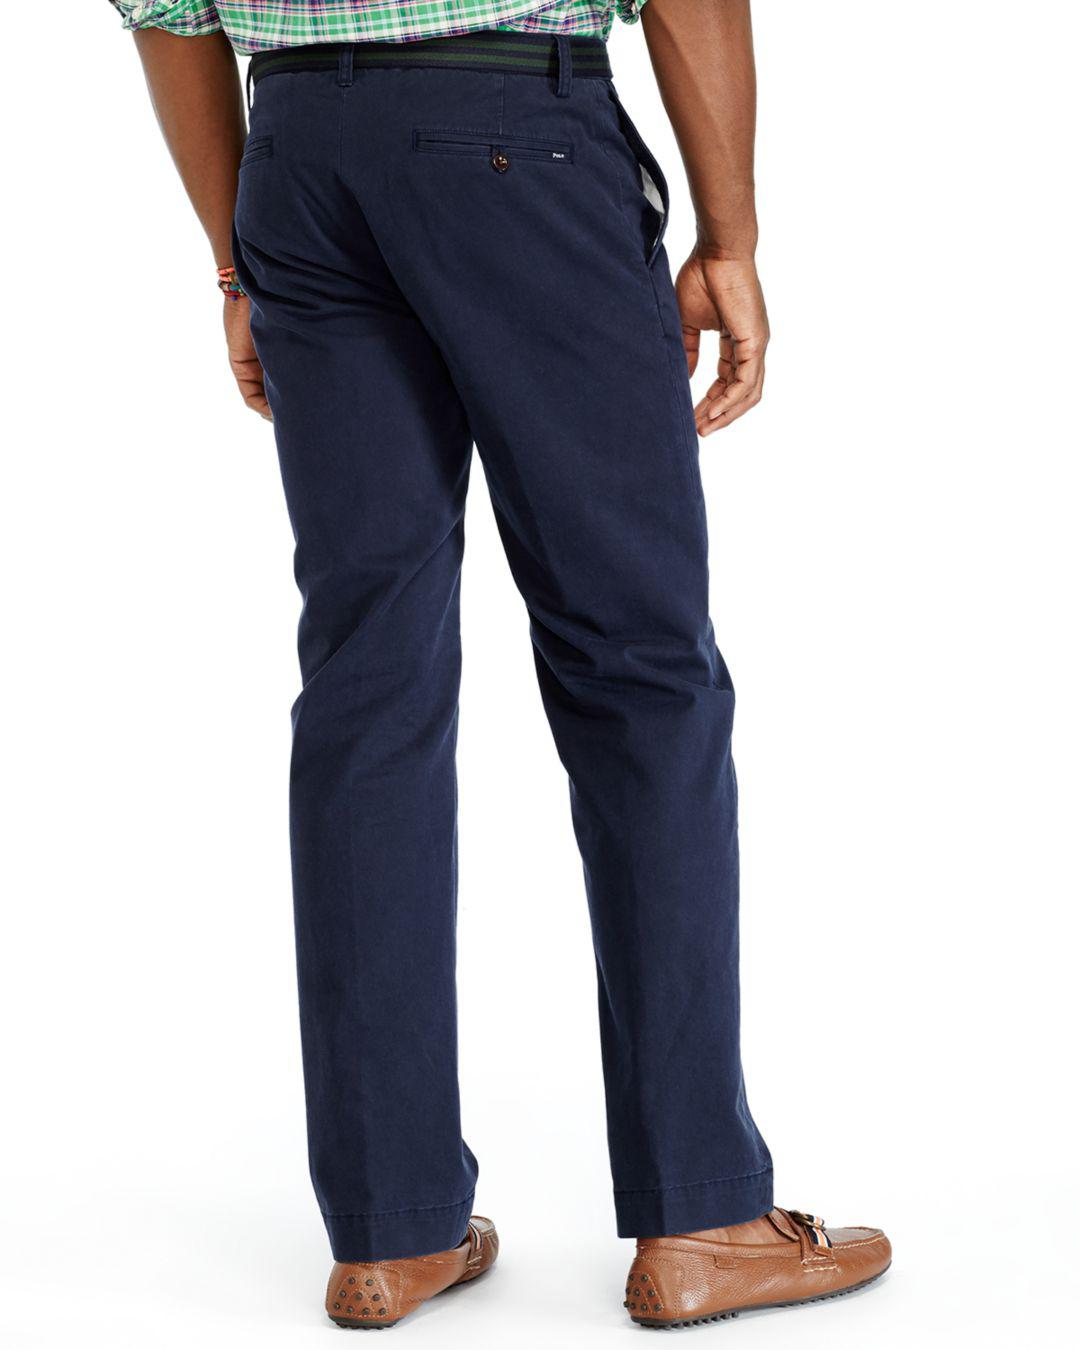 Polo Ralph Lauren Cotton Stretch Classic Fit Chino Pants in Blue for Men -  Lyst